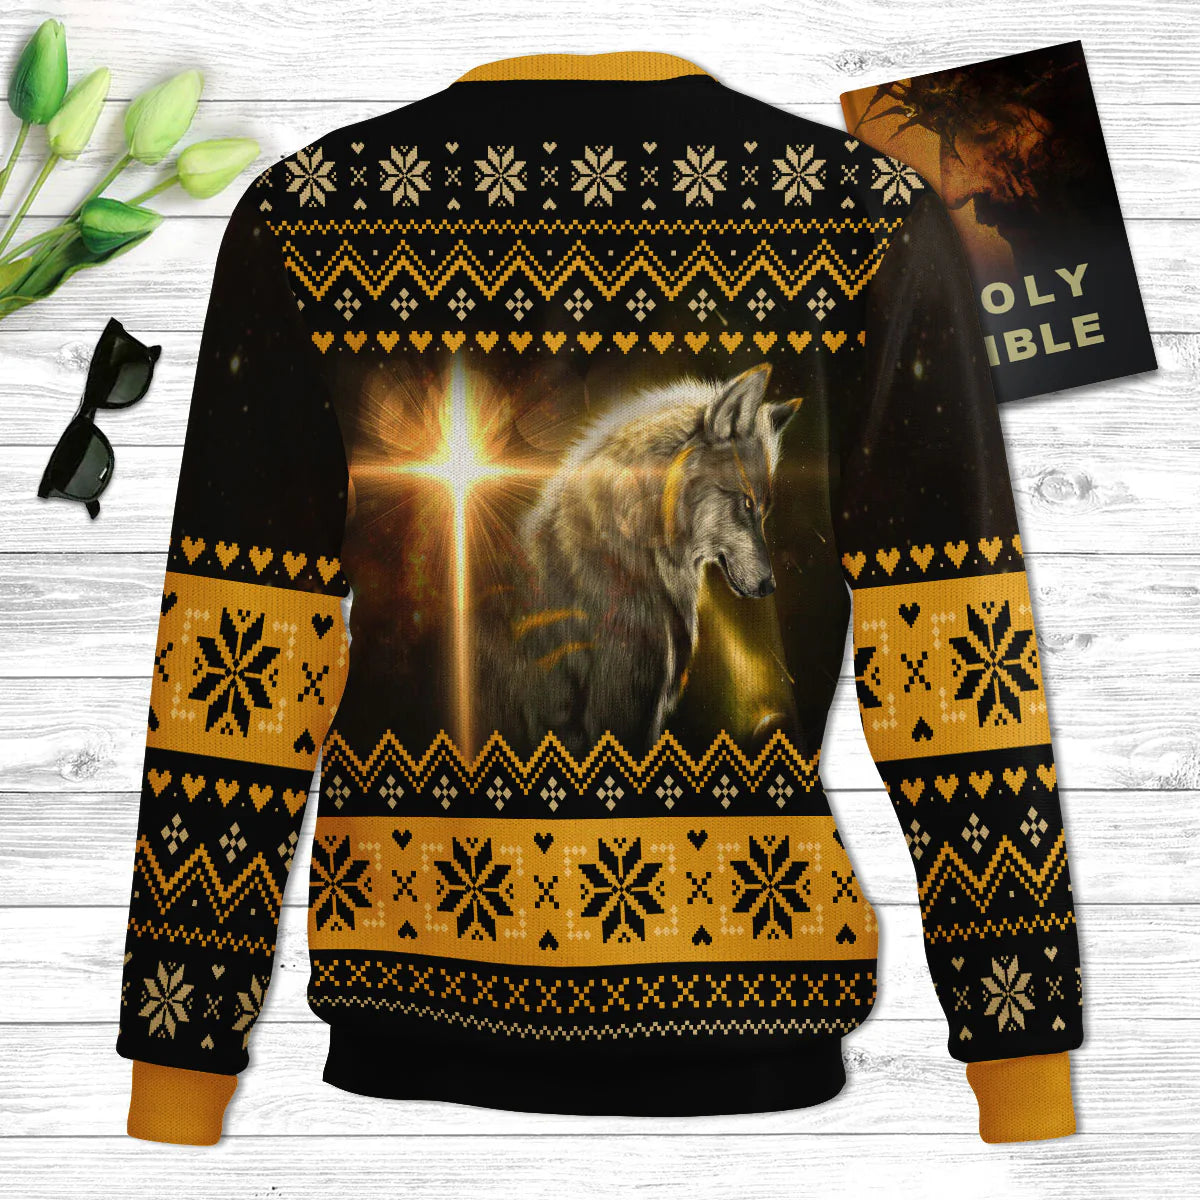 Believe In The Lord Jesus Wolf & Cross Ugly Christmas Sweater - Christian Unisex Sweater - Religious Christmas Gift